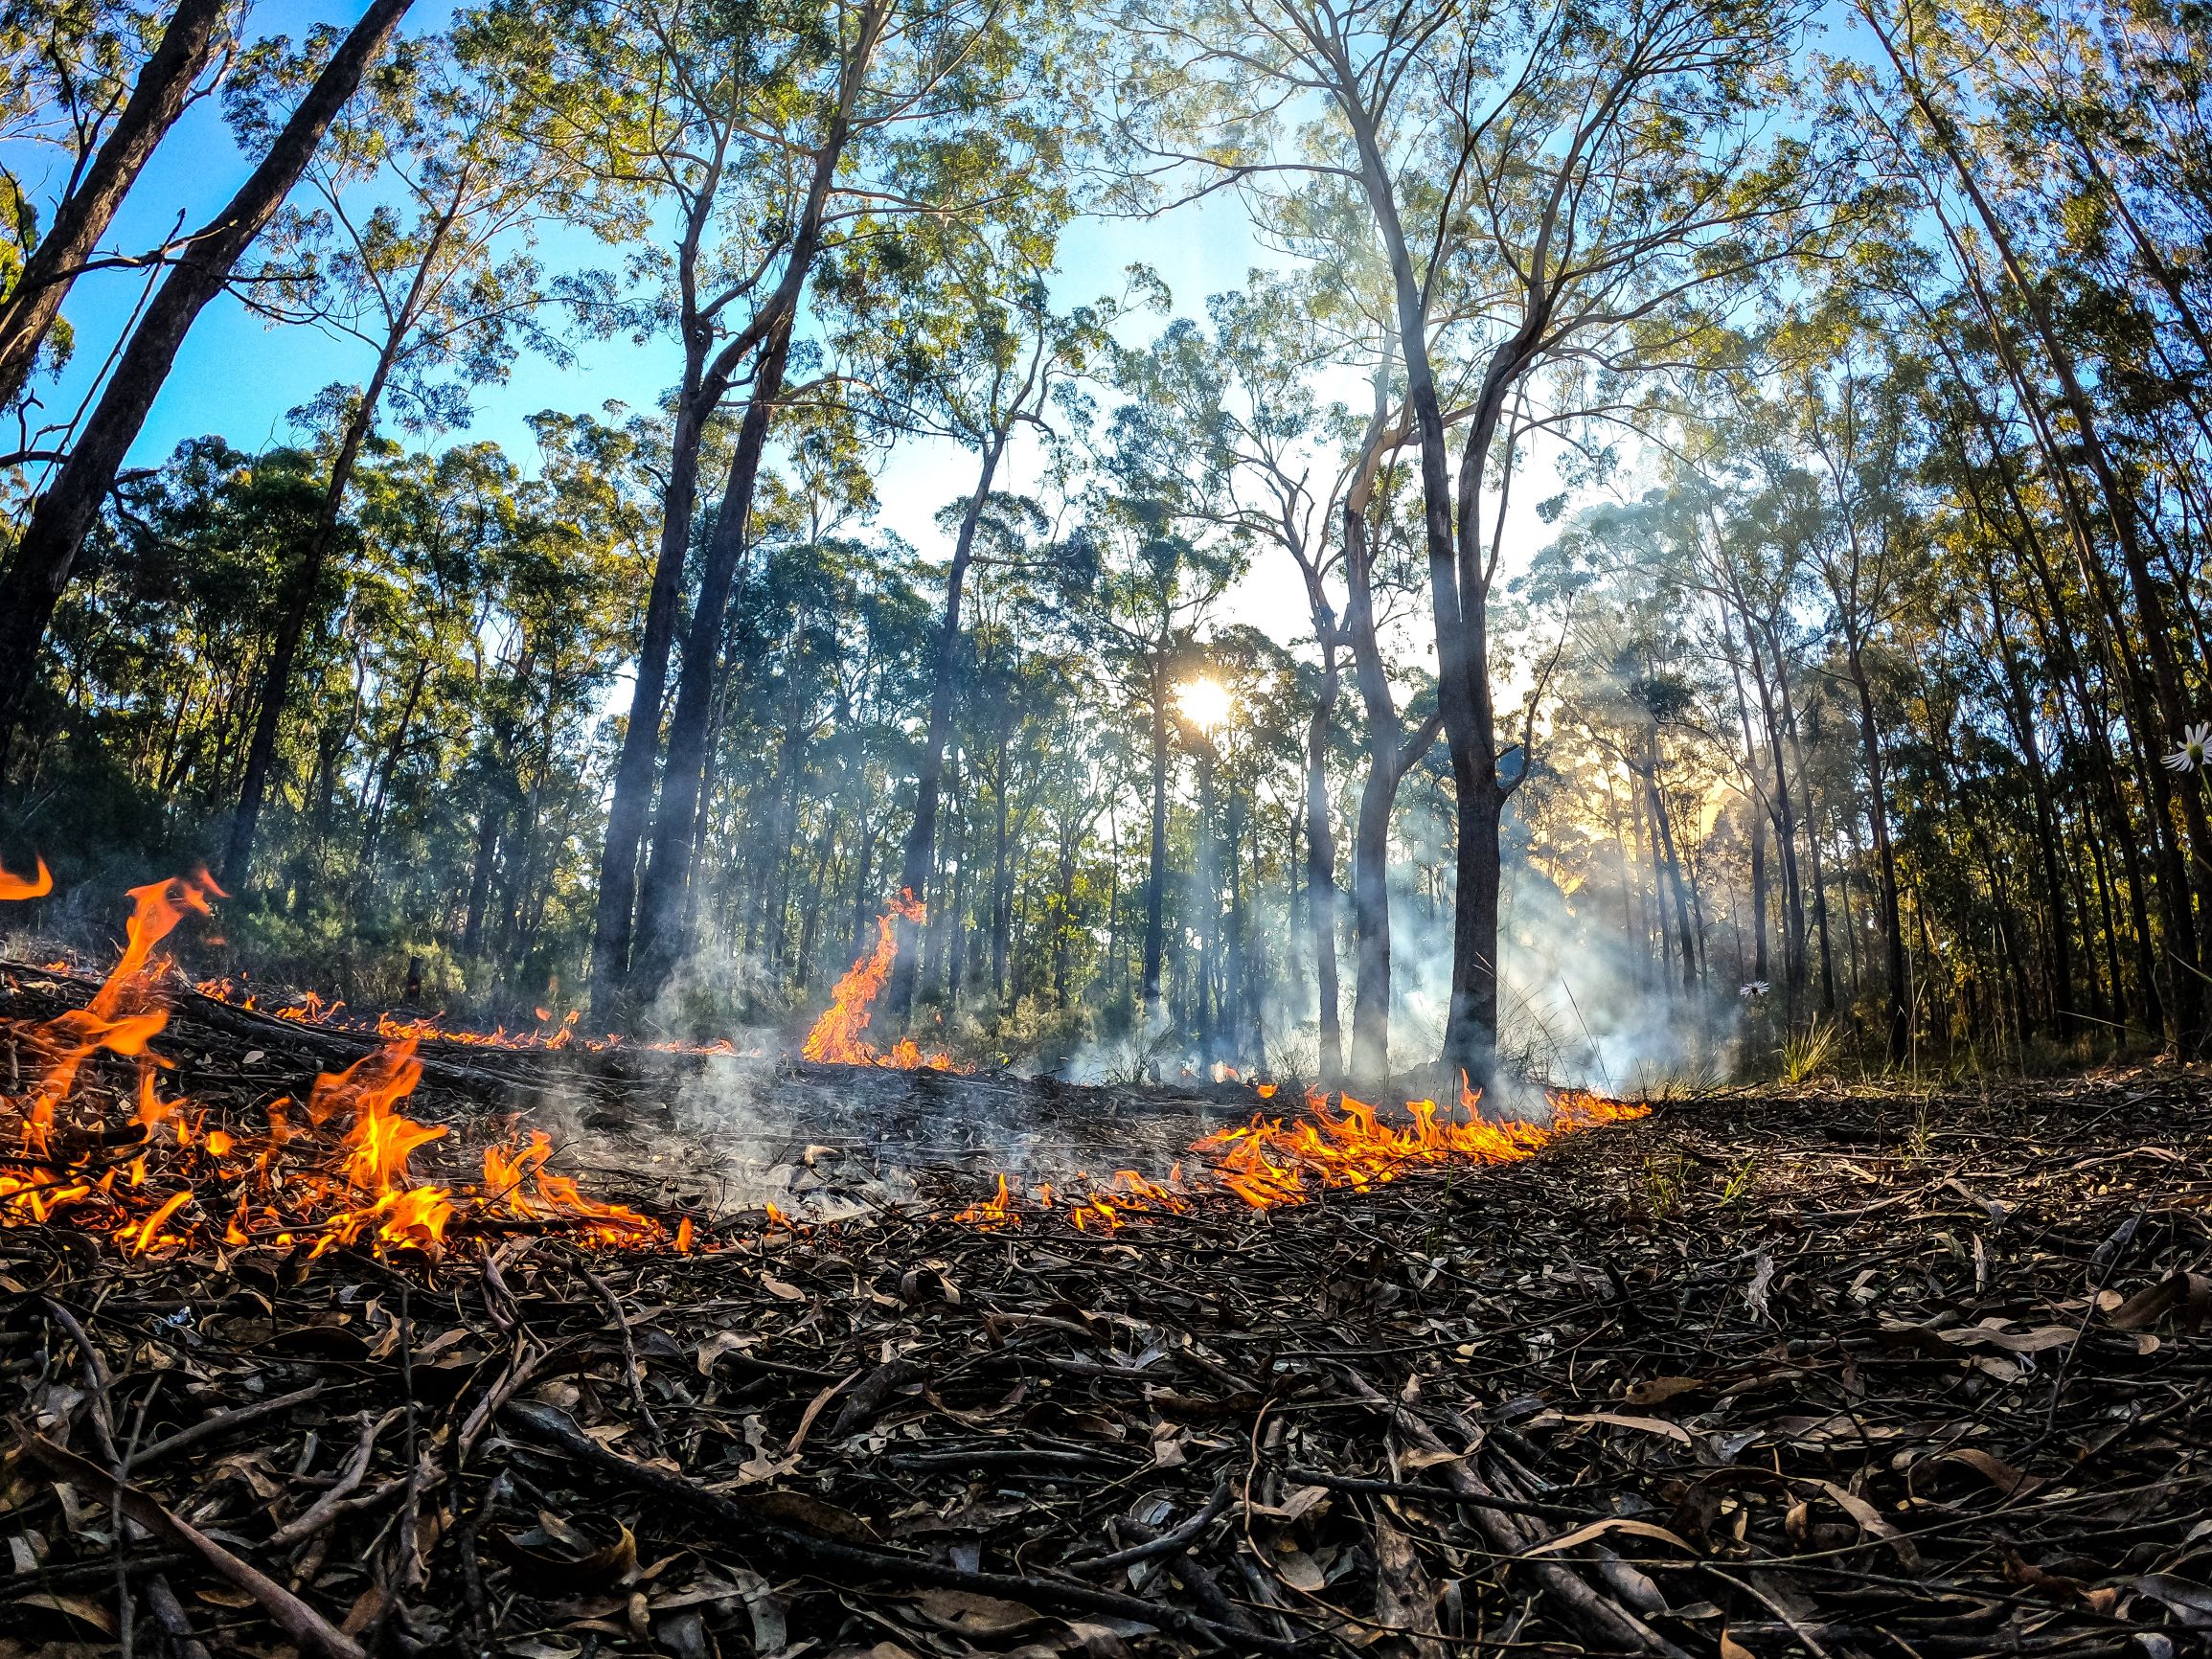 Planned burning underway in East Gippsland